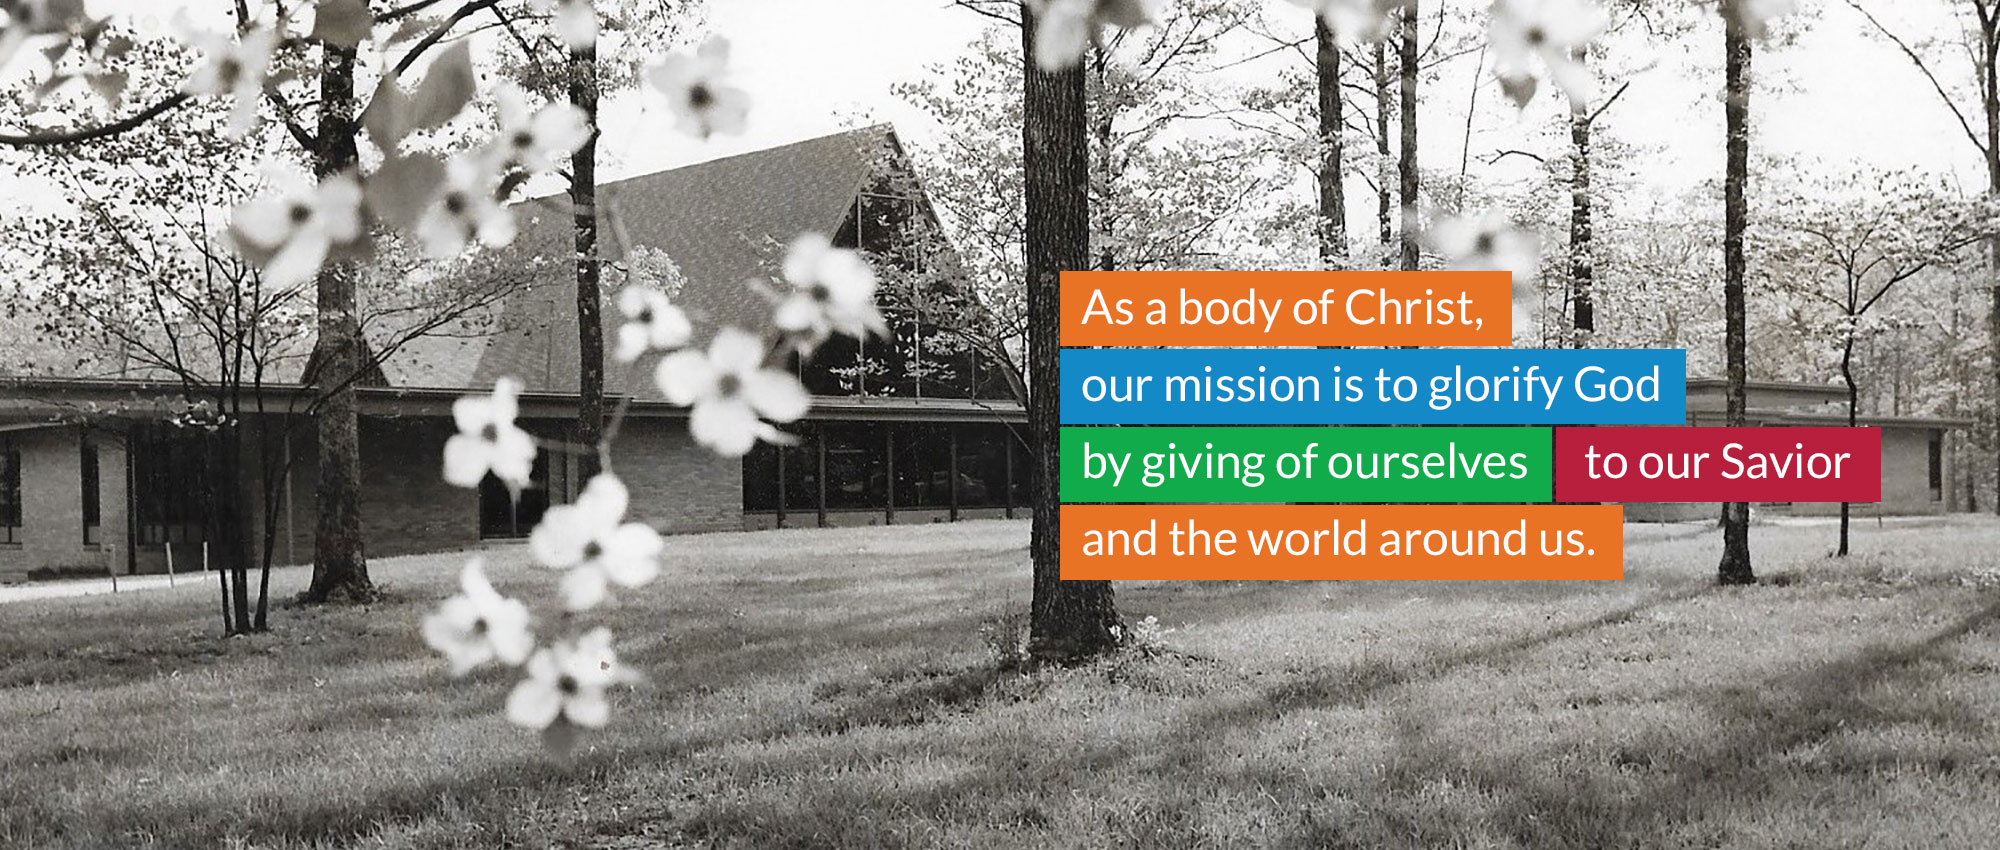 As a body of Christ, our mission is to glorify God by giving of ourselves to our Savior and the world around us.